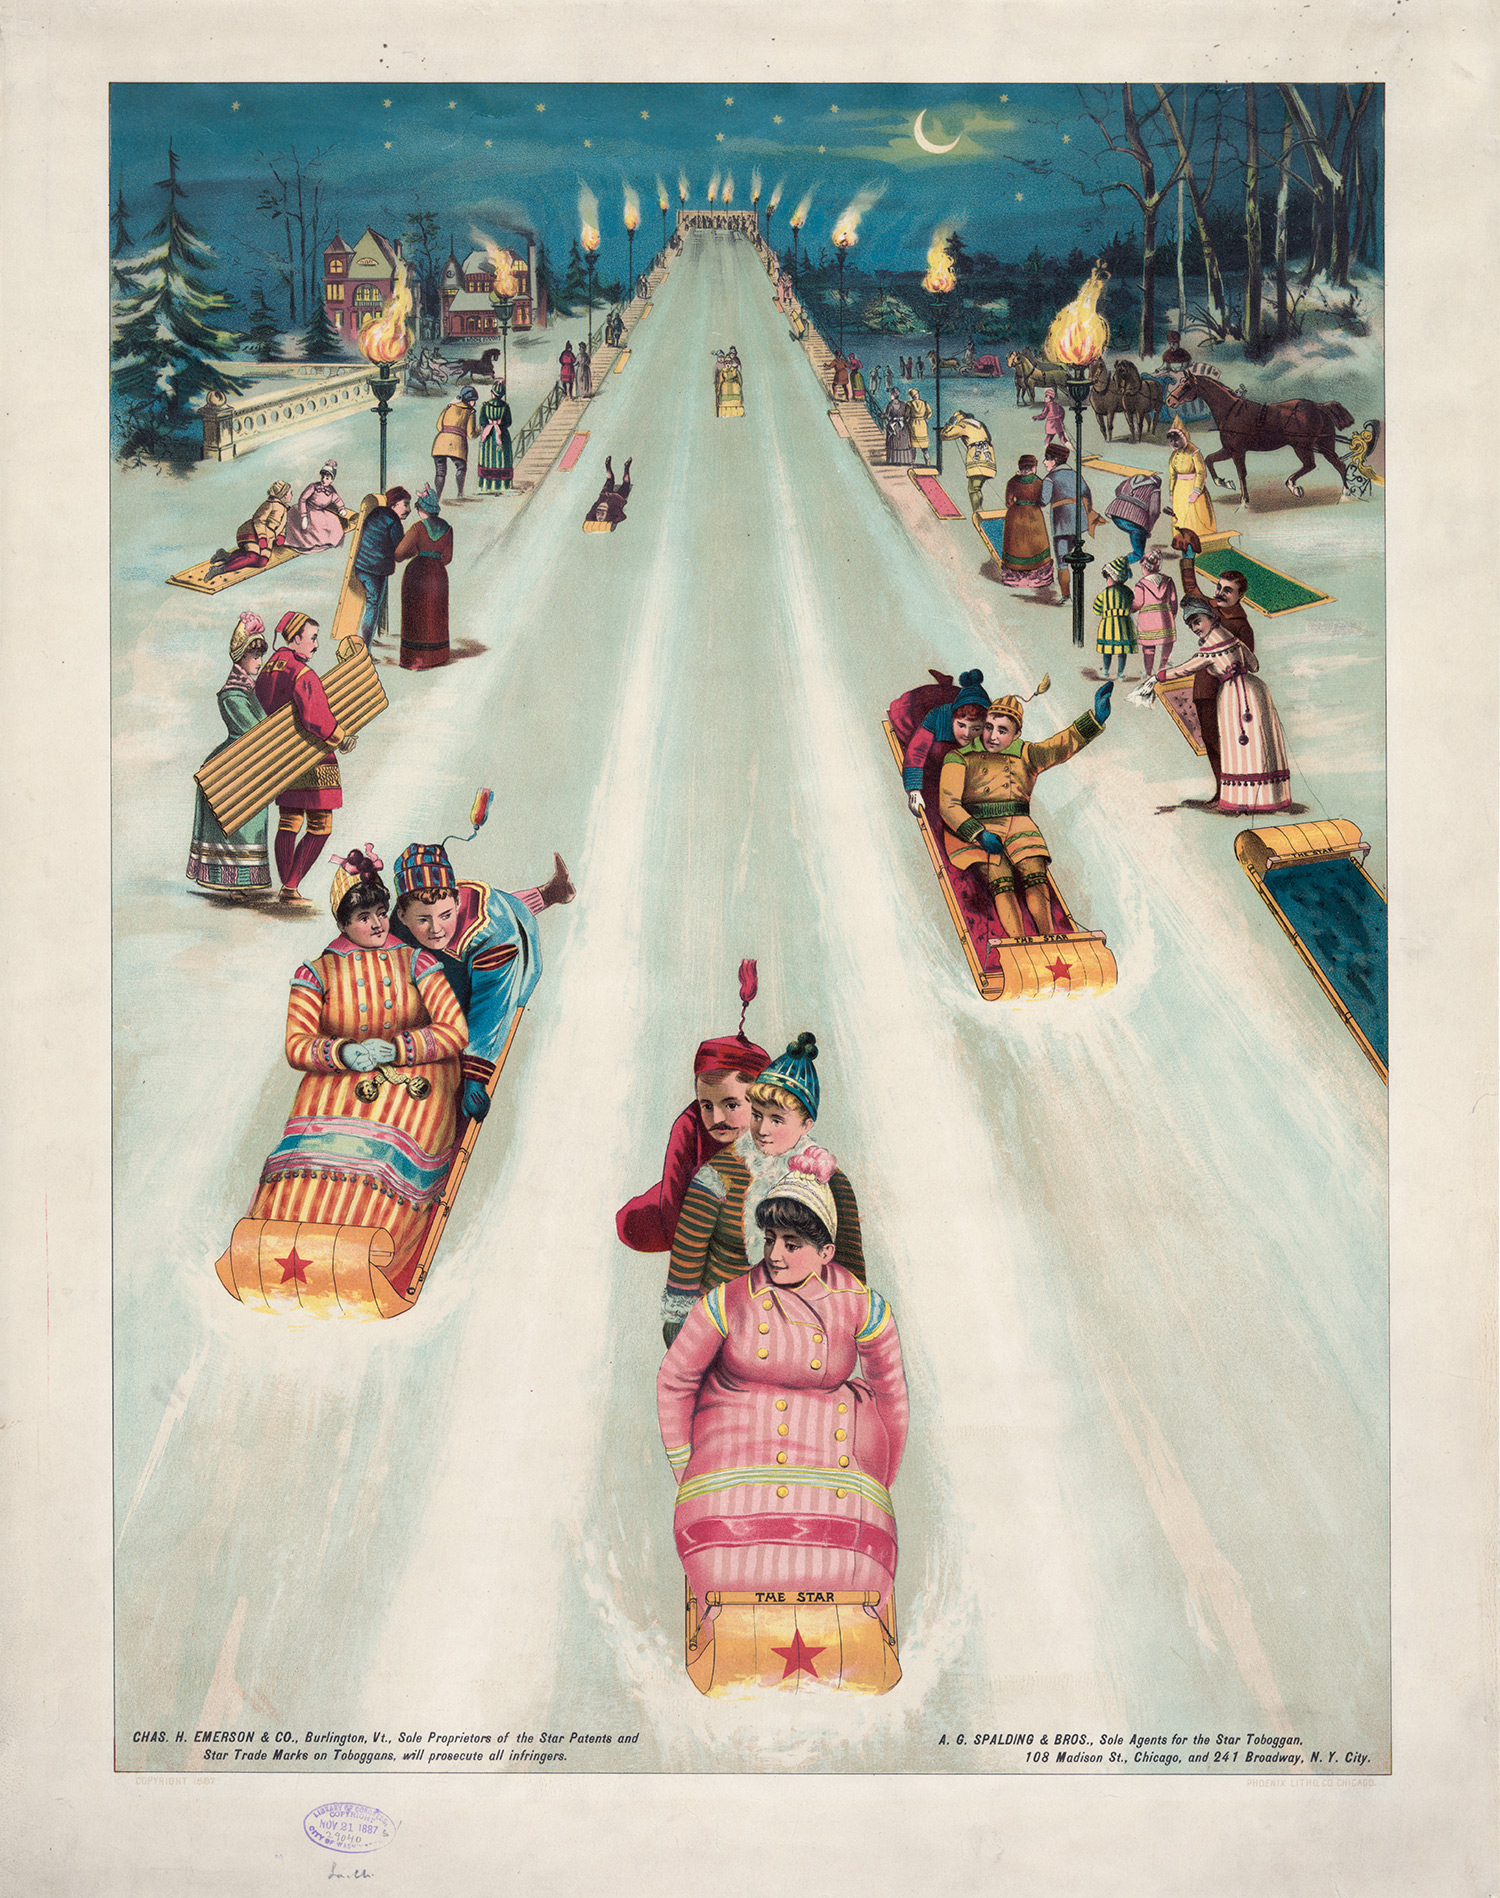 A painting of adults in Victorian dress and riding toboggans down a long, snowy ramp or hill at nighttime. 